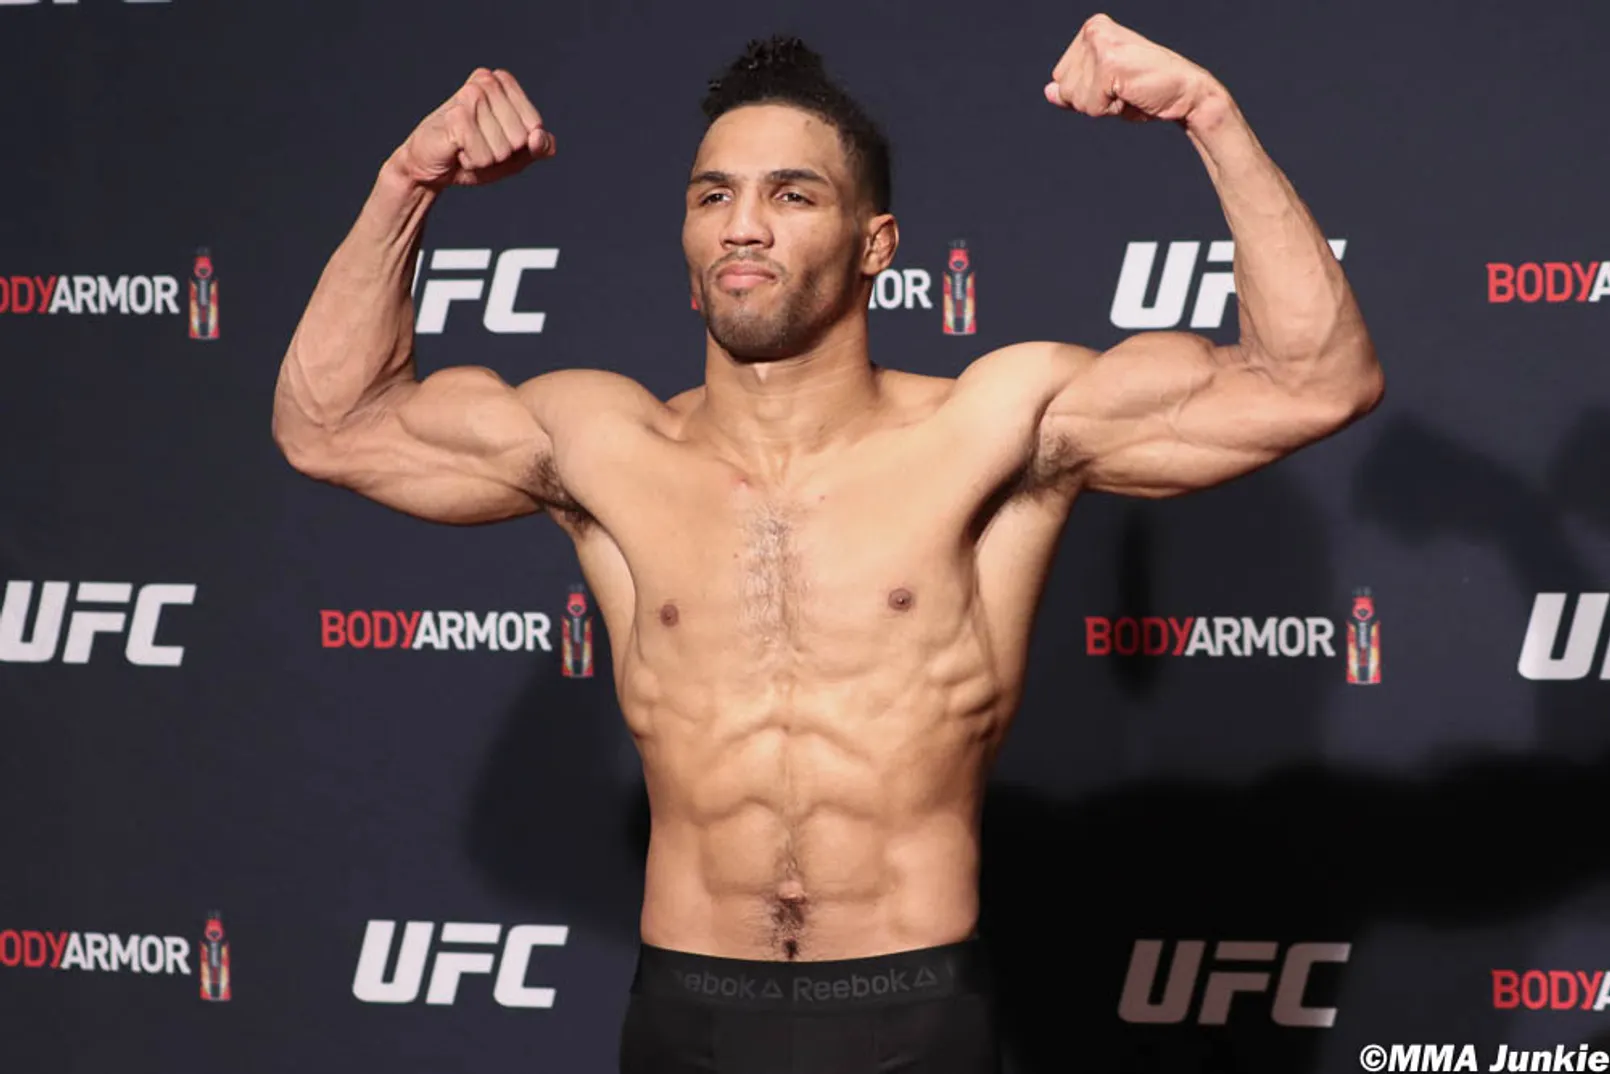 Kevin Lee Ufc 244 Official Weigh Ins.jpg